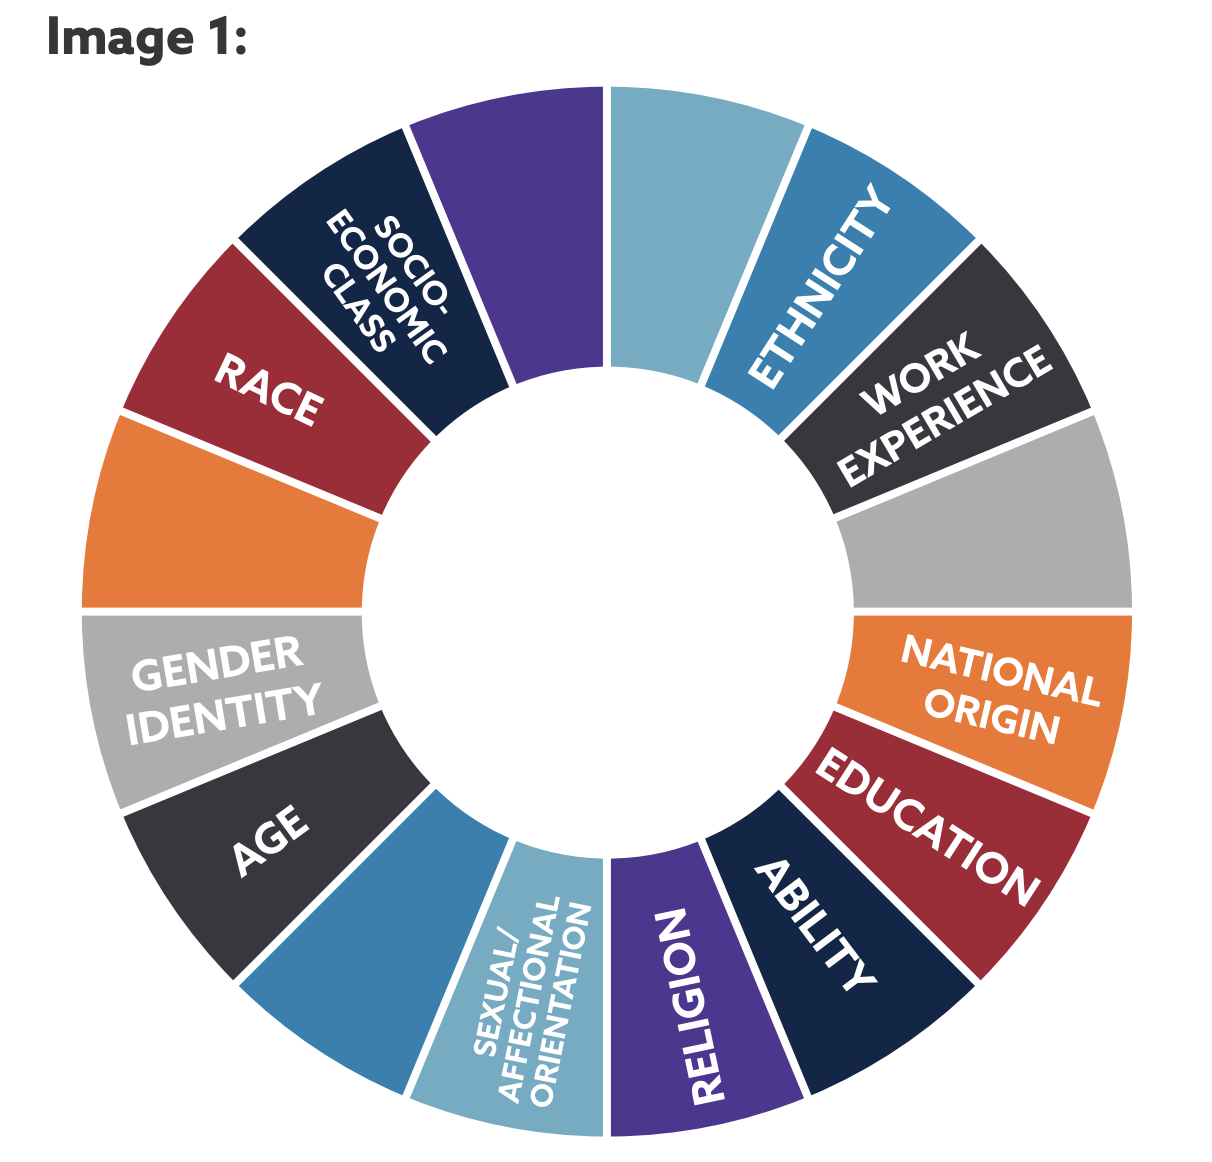 Wheel showing different types of identity categories: Ethnicity, work experience, national origin, education, ability, religion, sexual/affectional orientation, age, gender identity, race, socio-economic class.